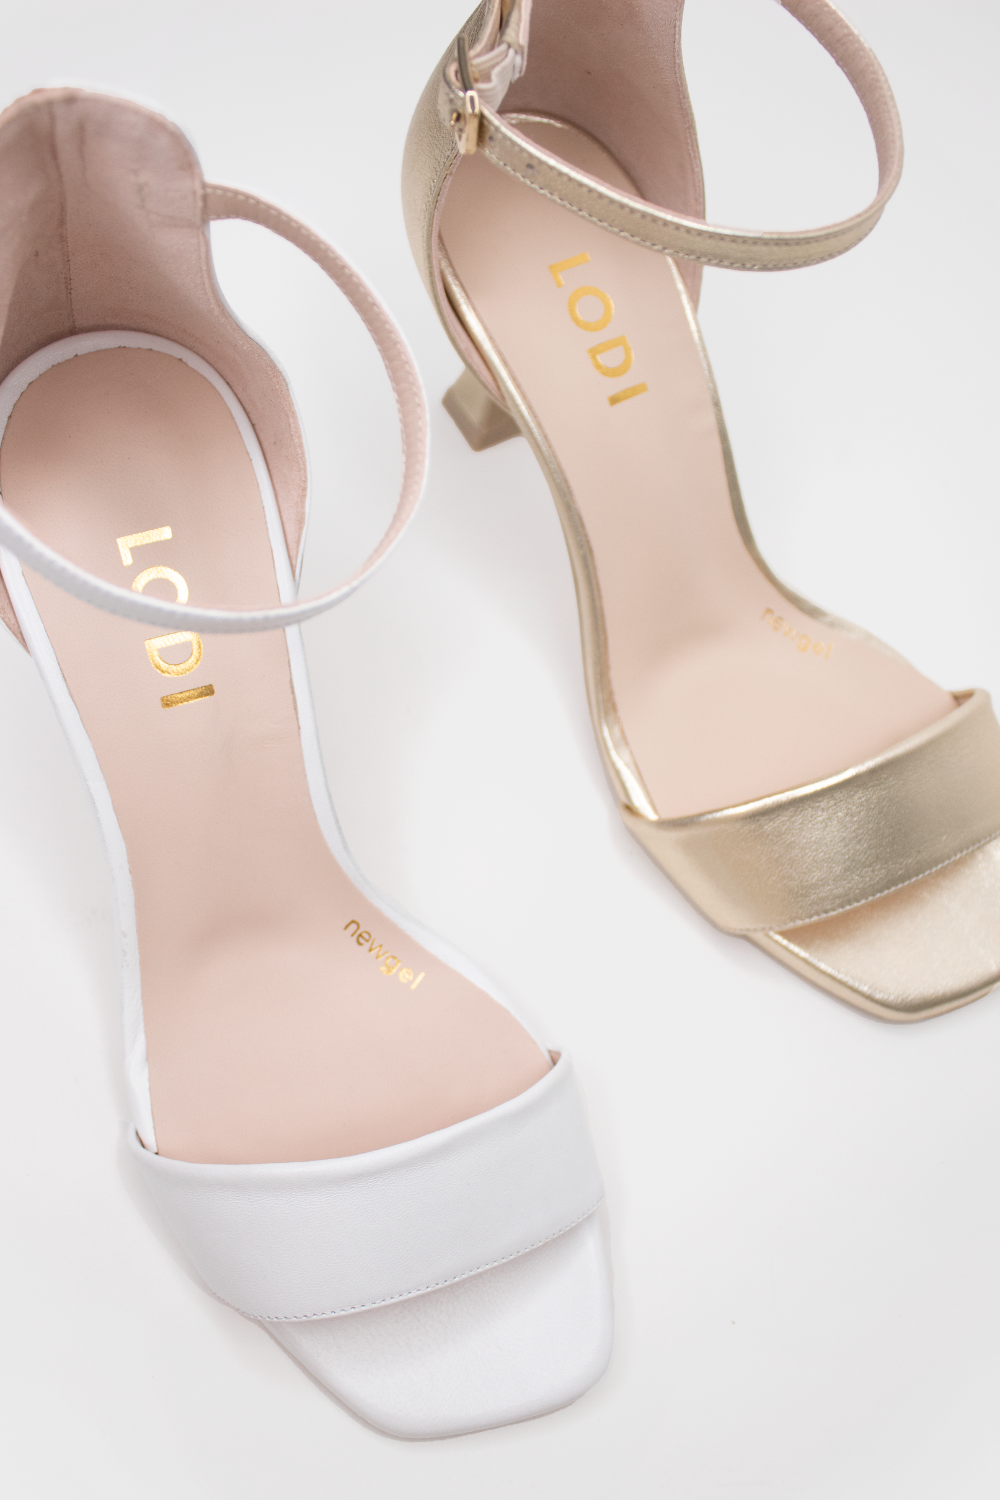 Lisco Heeled sandals from Lodi in White and Gold Leather - Comfortable style